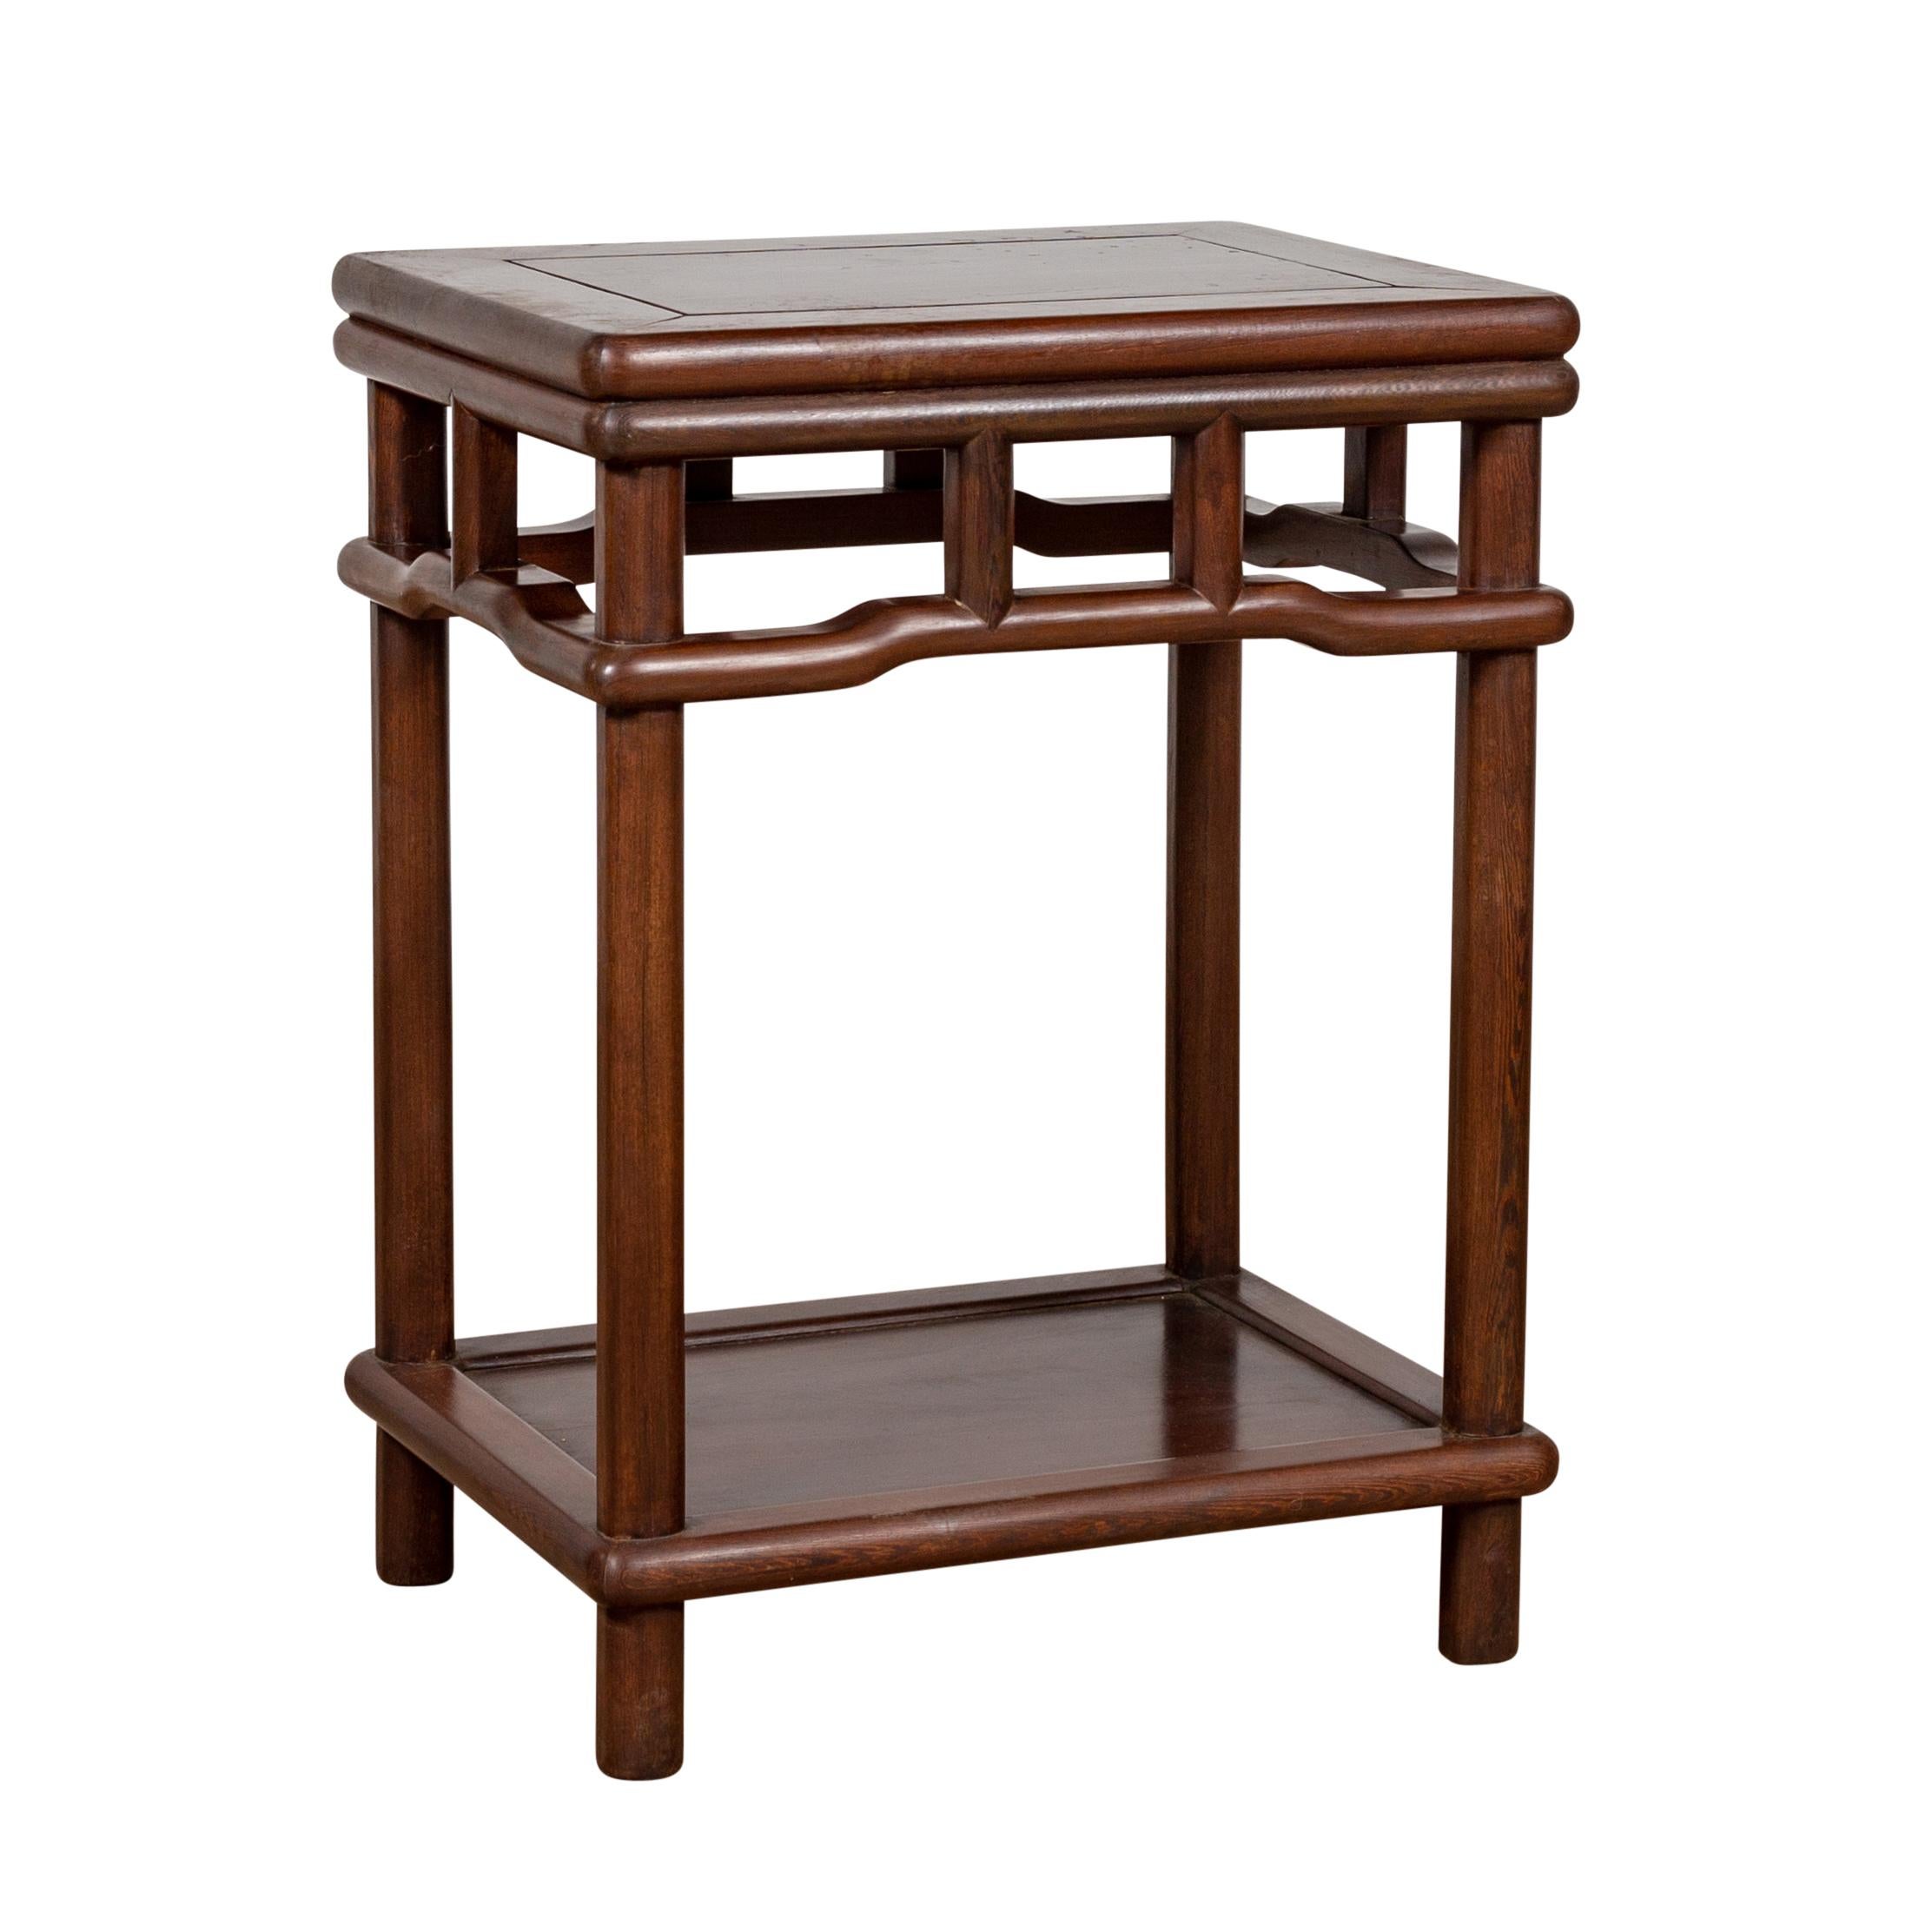 Chinese Ming Style Accent Side Table with Dark Wood Patina and Humpback Apron